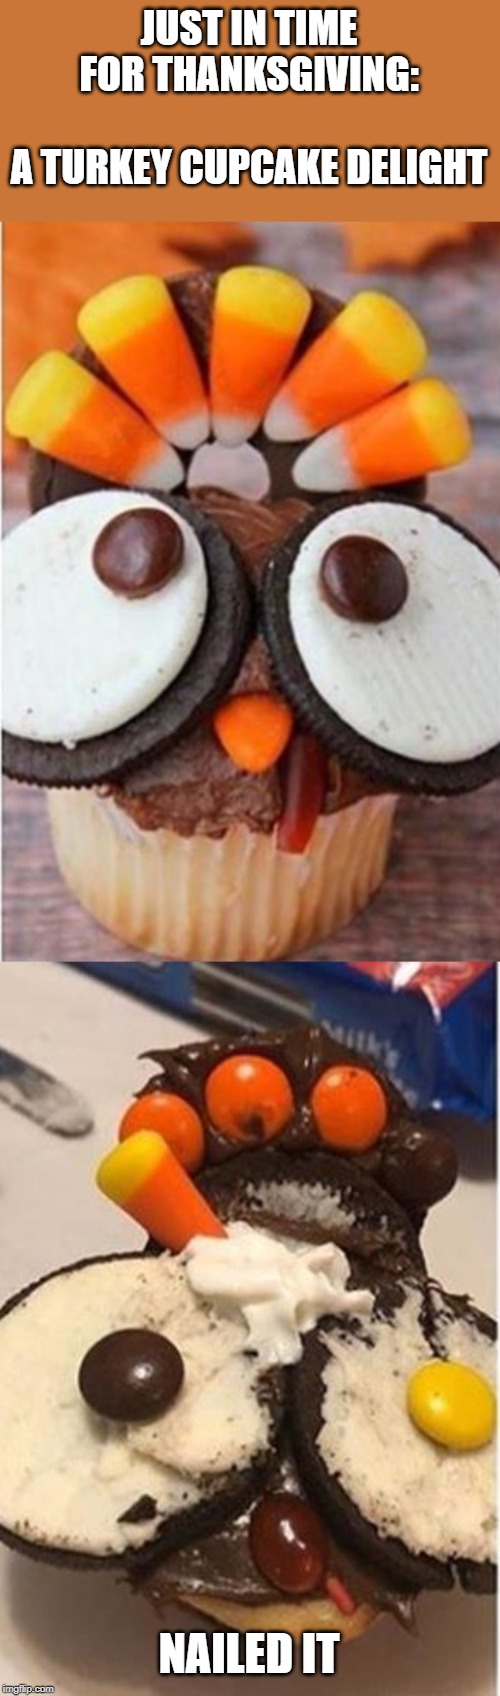 Task failed successfully | JUST IN TIME FOR THANKSGIVING:
 
A TURKEY CUPCAKE DELIGHT; NAILED IT | image tagged in memes,funny,turkey,nailed it,task failed successfully,thanksgiving | made w/ Imgflip meme maker